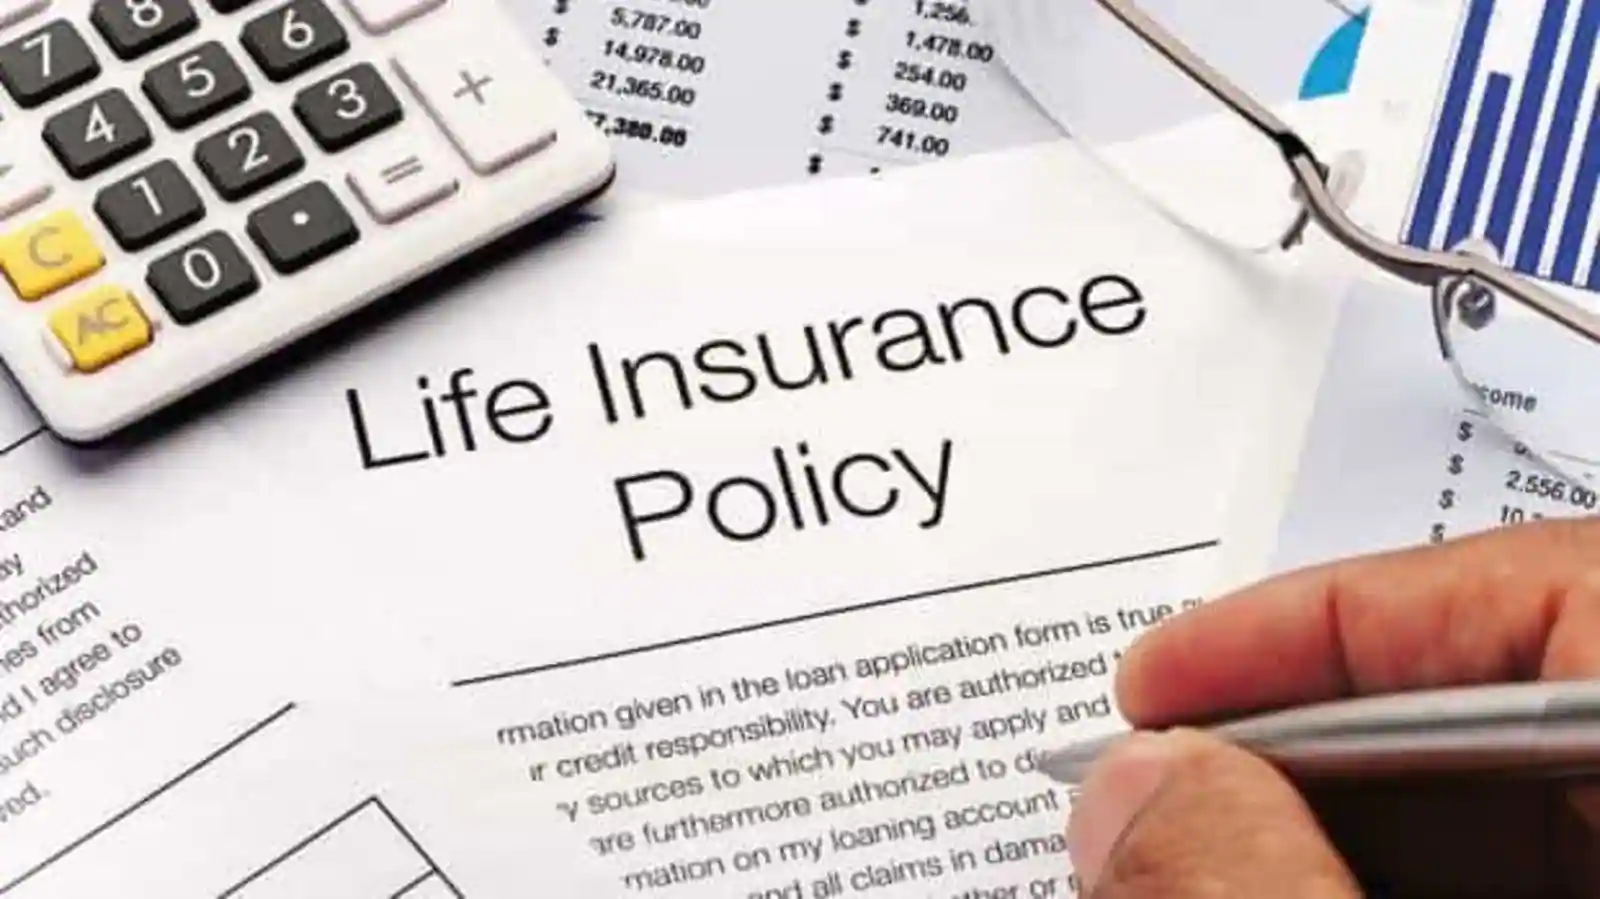 5 Things to Consider Before Taking out Life Insurance